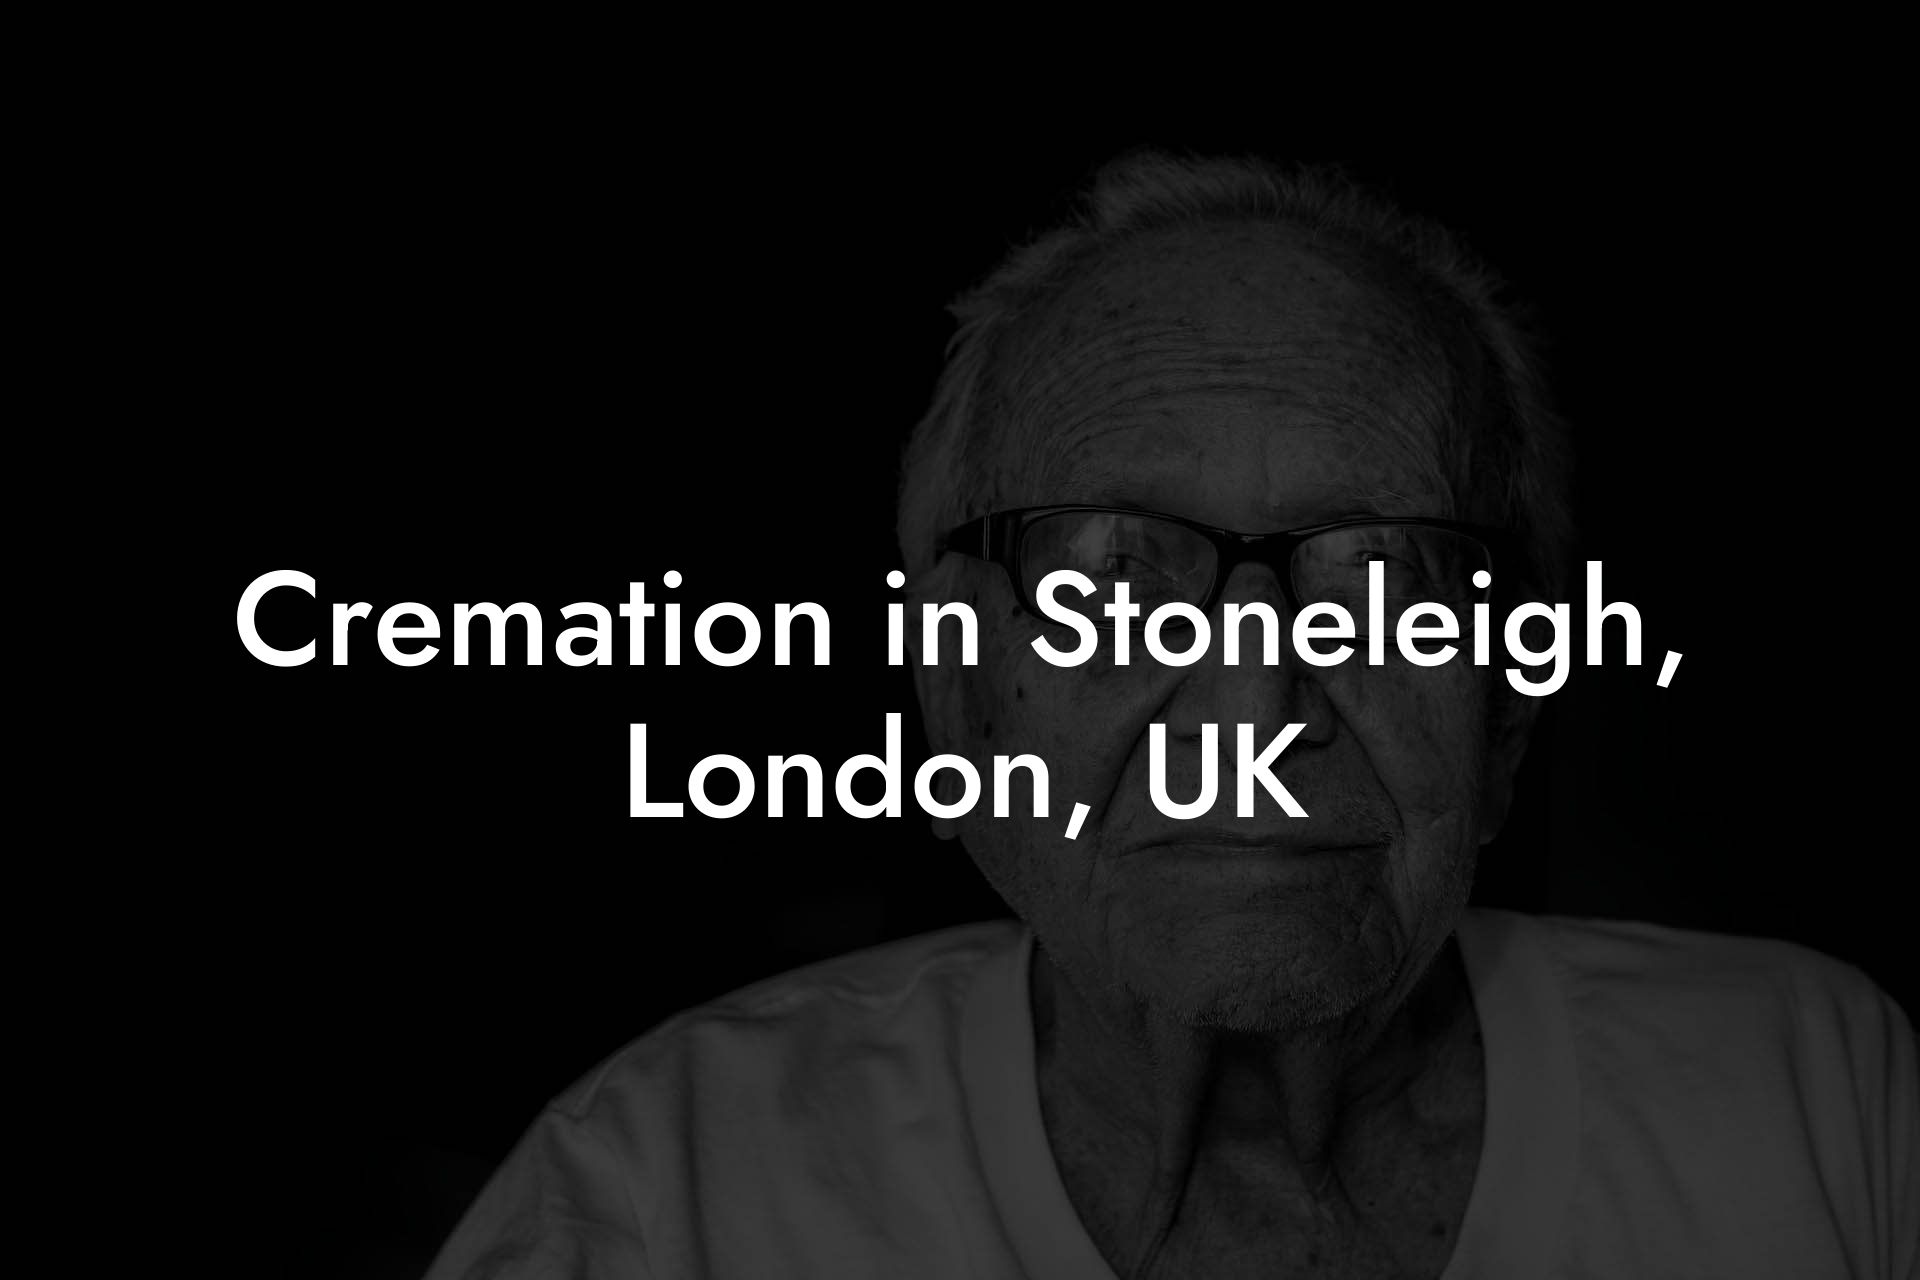 Cremation in Stoneleigh, London, UK